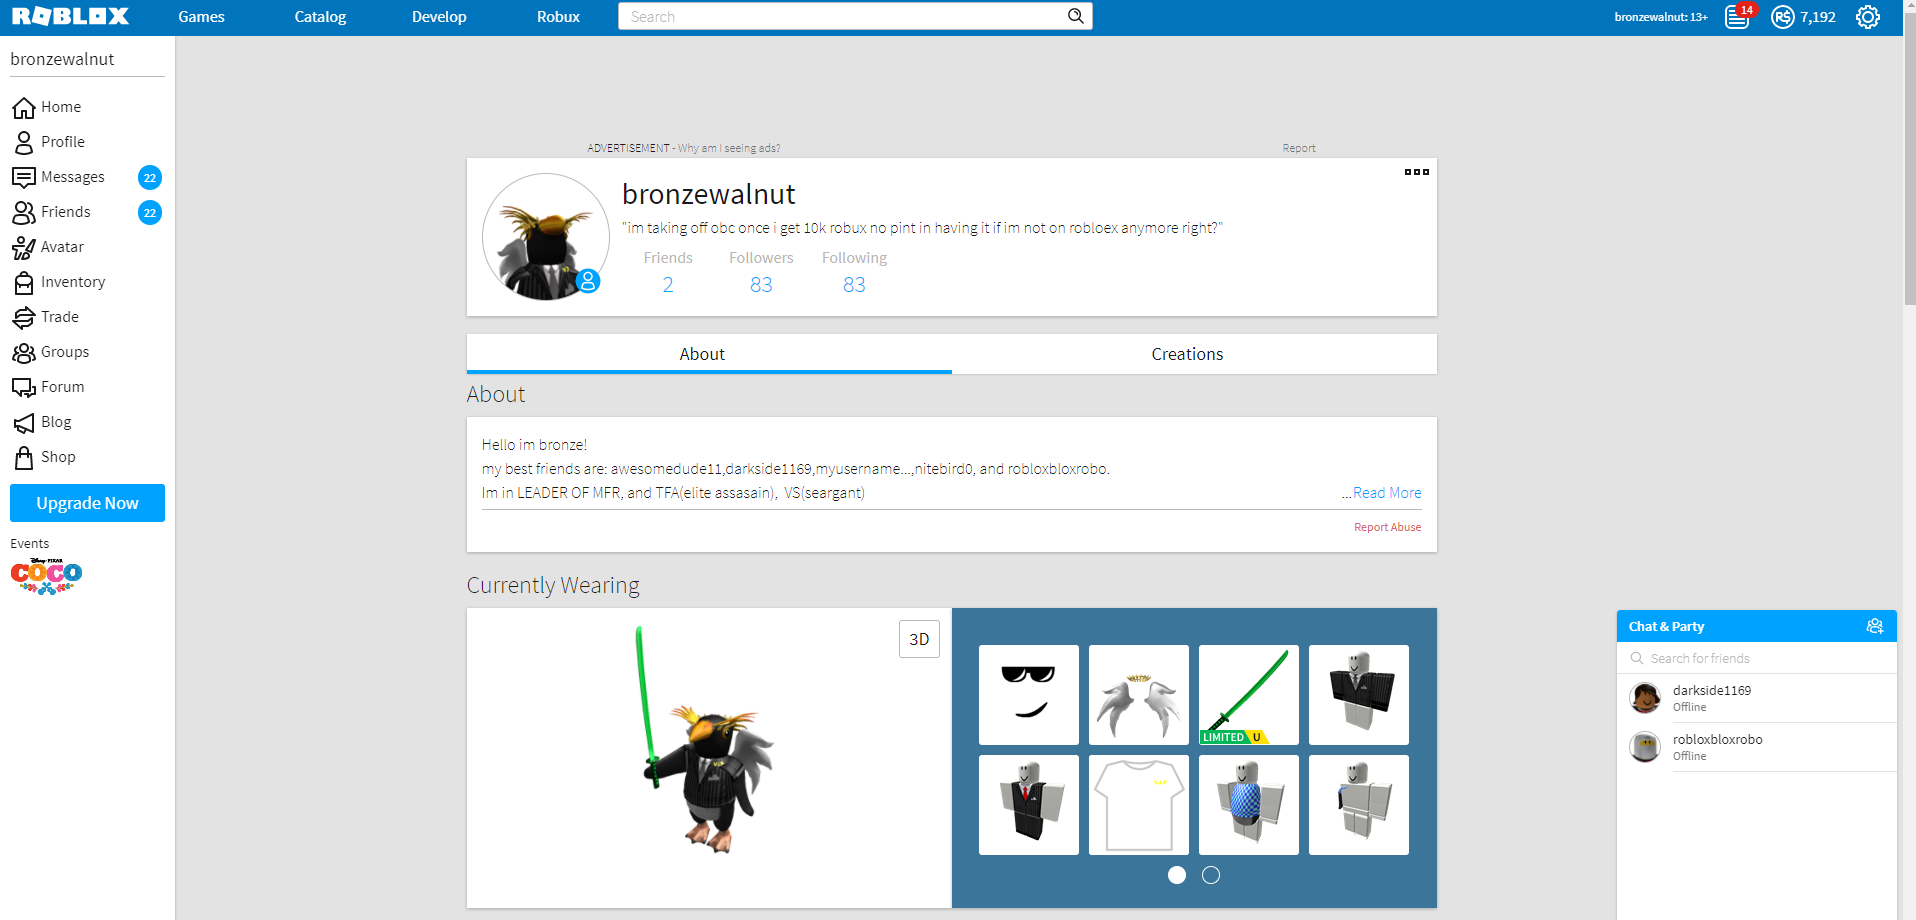 Bronzewalnut 7 192 Robux - 10k robux for an ad